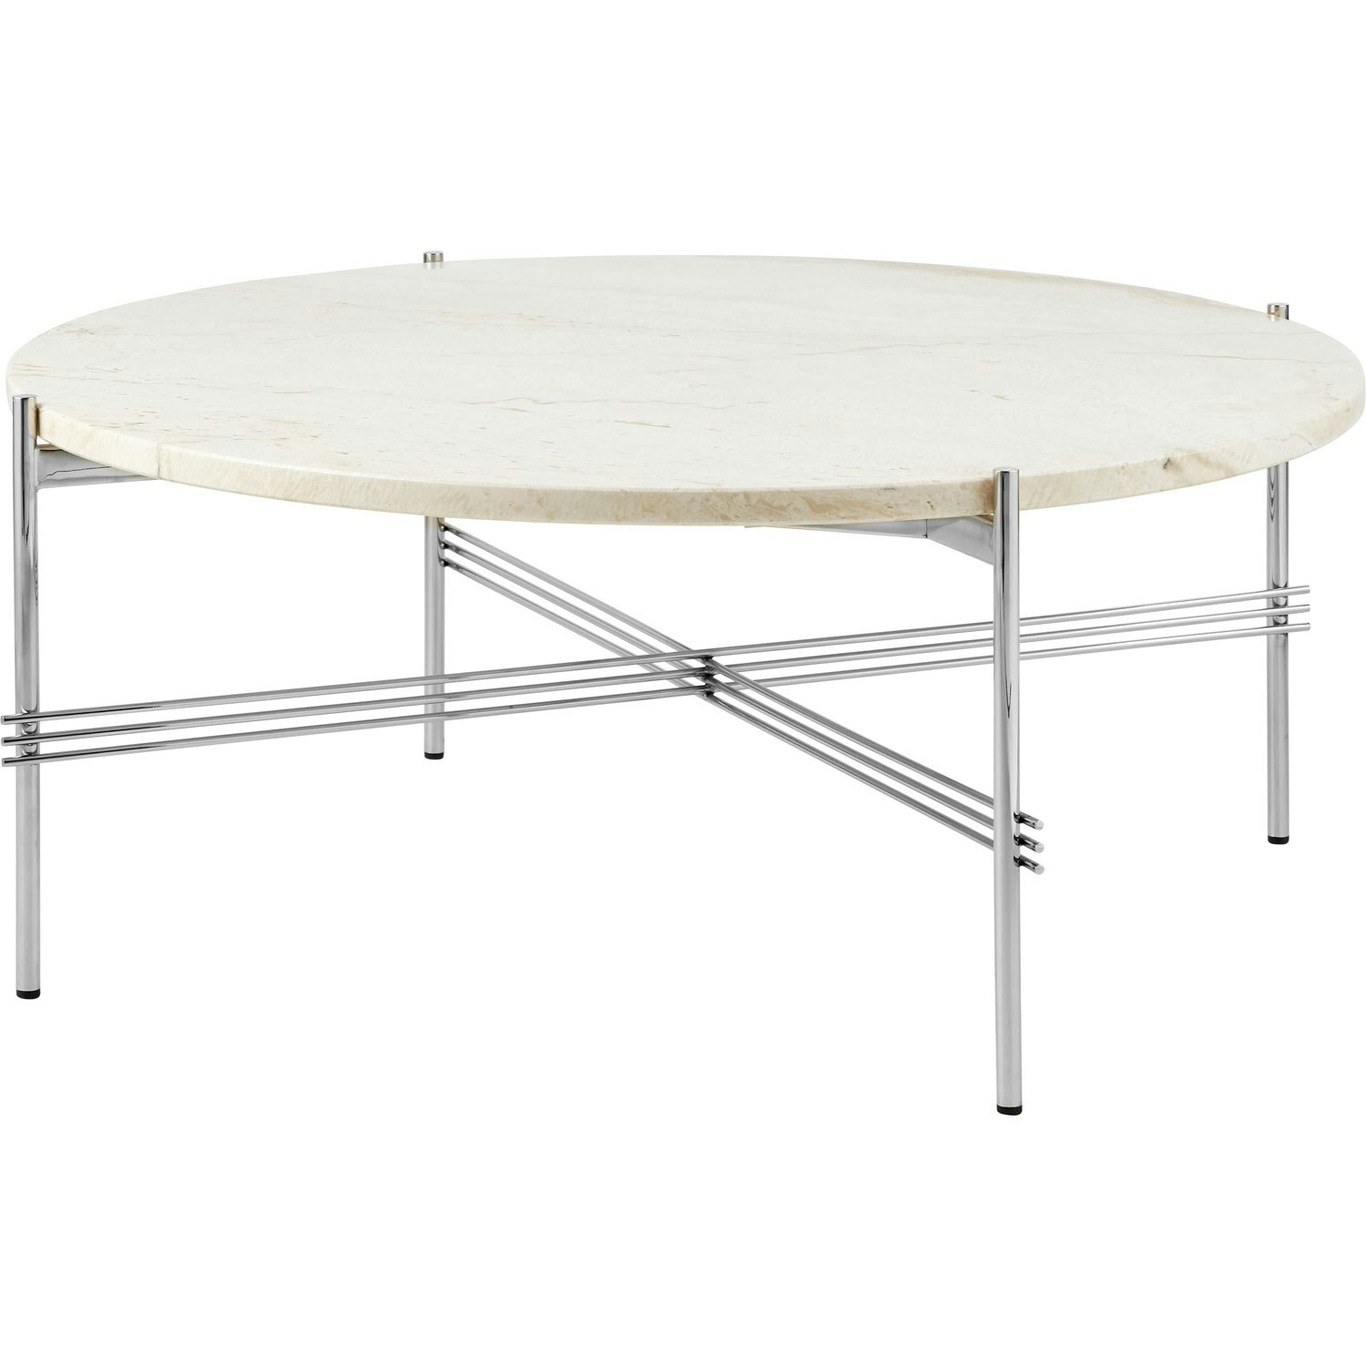 TS Coffee Table 80 cm, Polished Steel / Neutral white Travertine